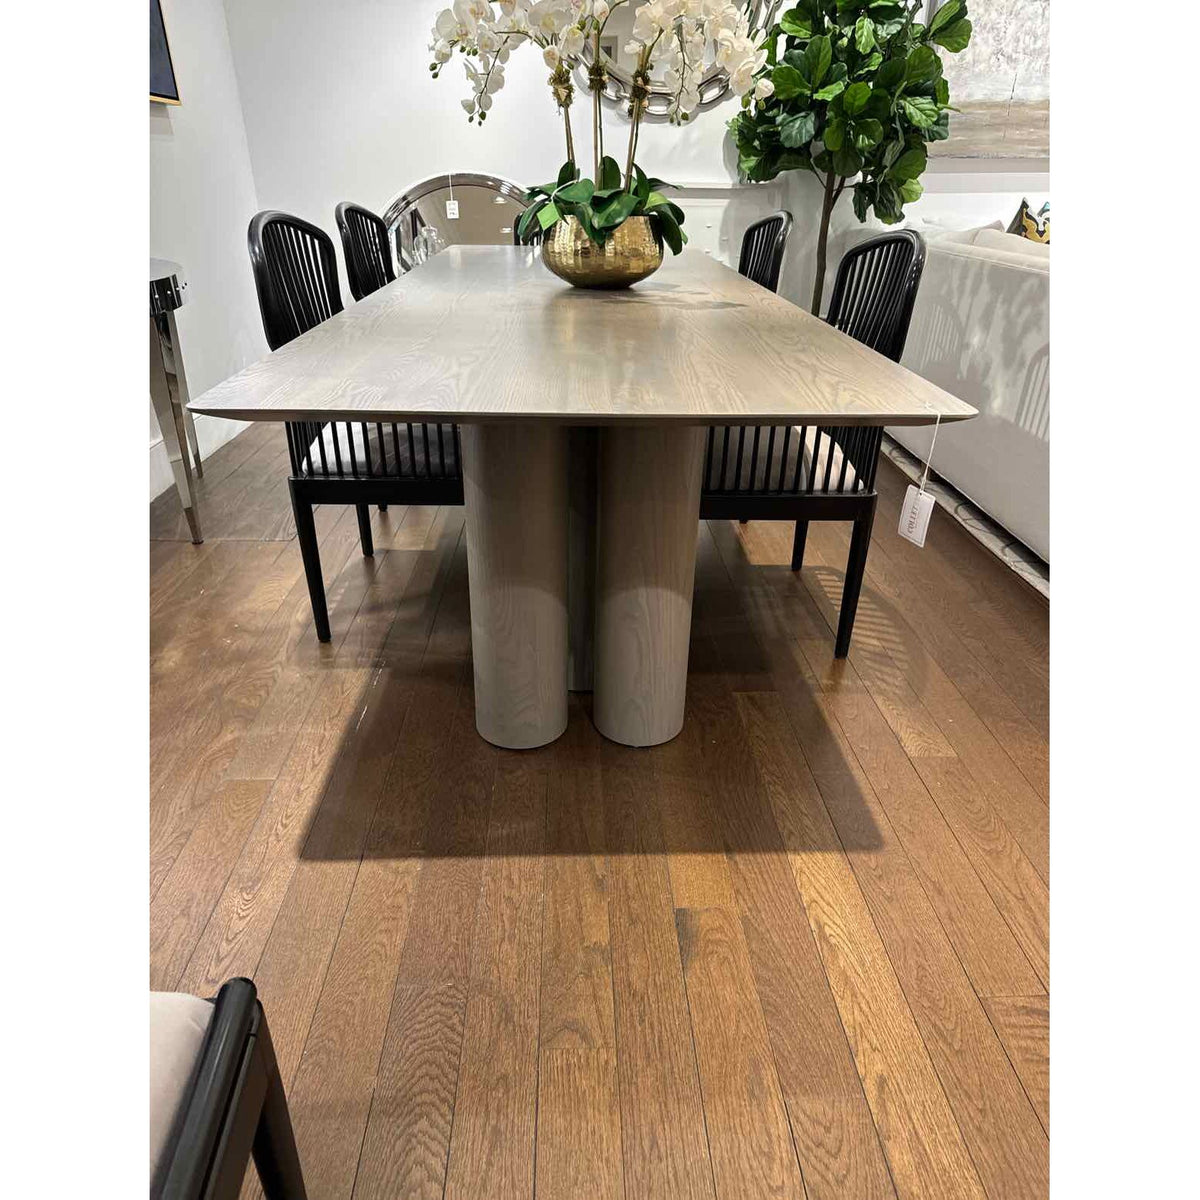 The Reade Dining Table in Greywash 108"Lx40"Wx30'H